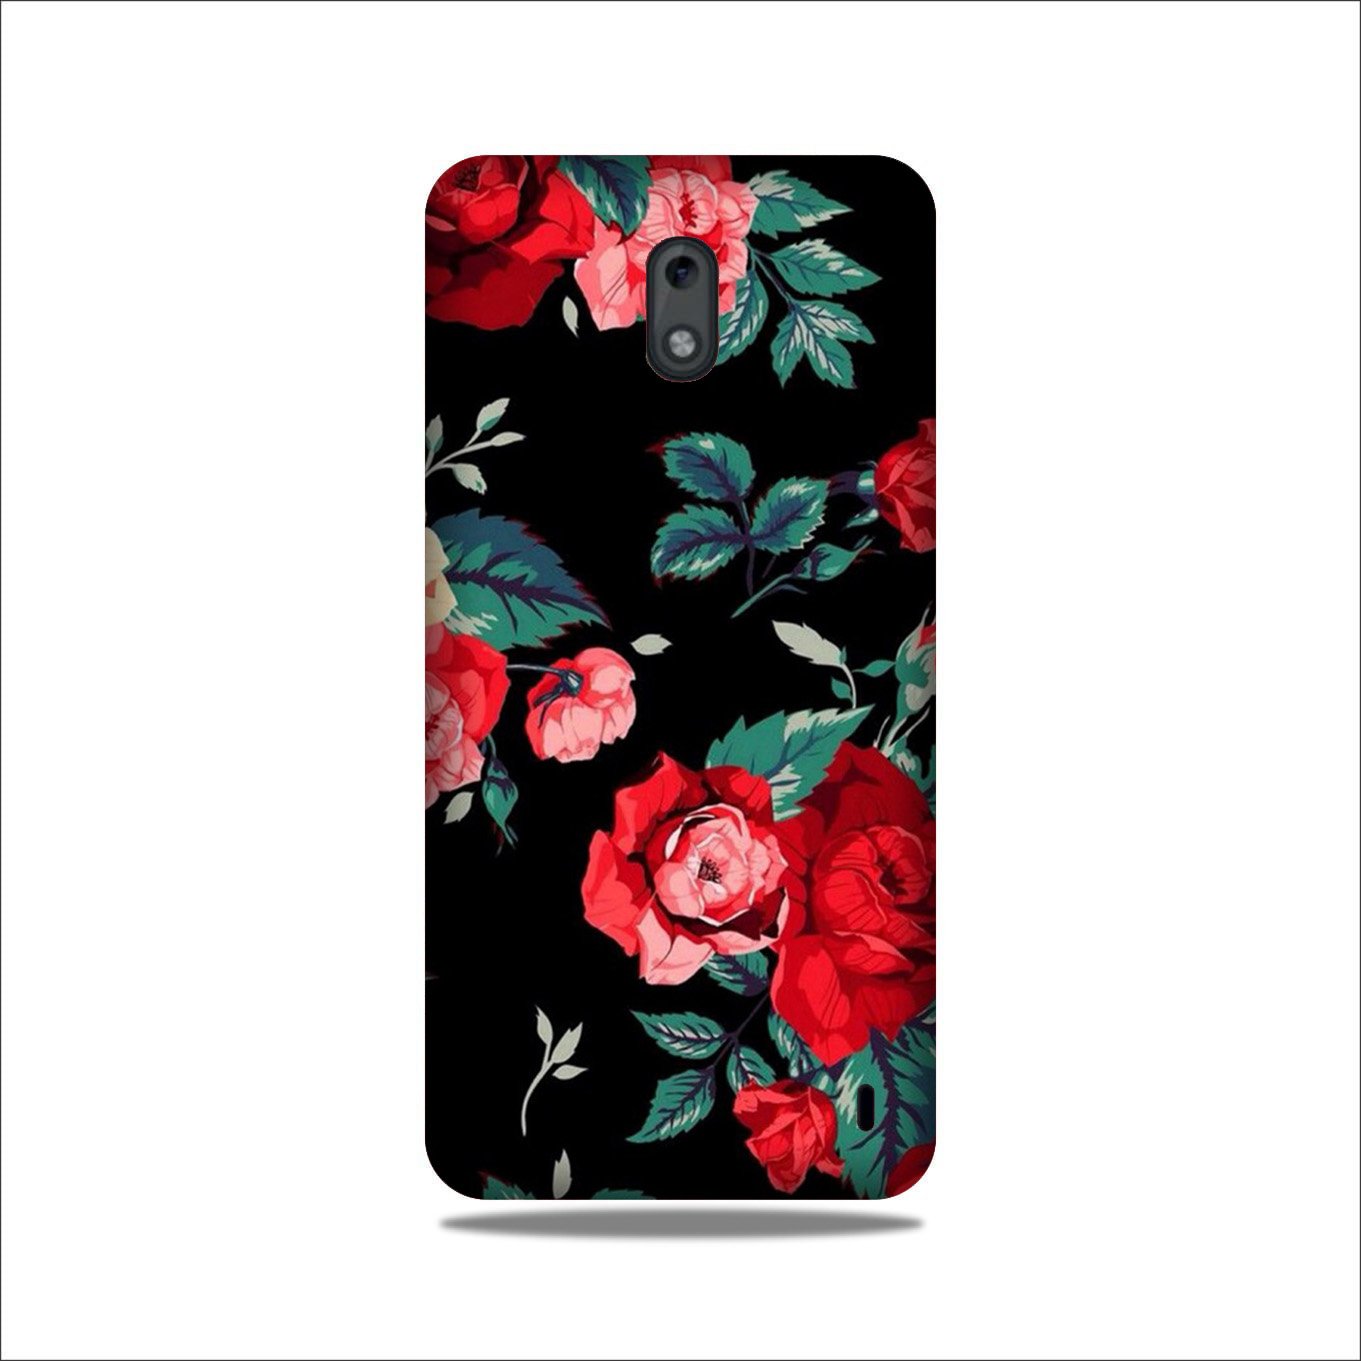 Red Rose2 Case for Nokia 2